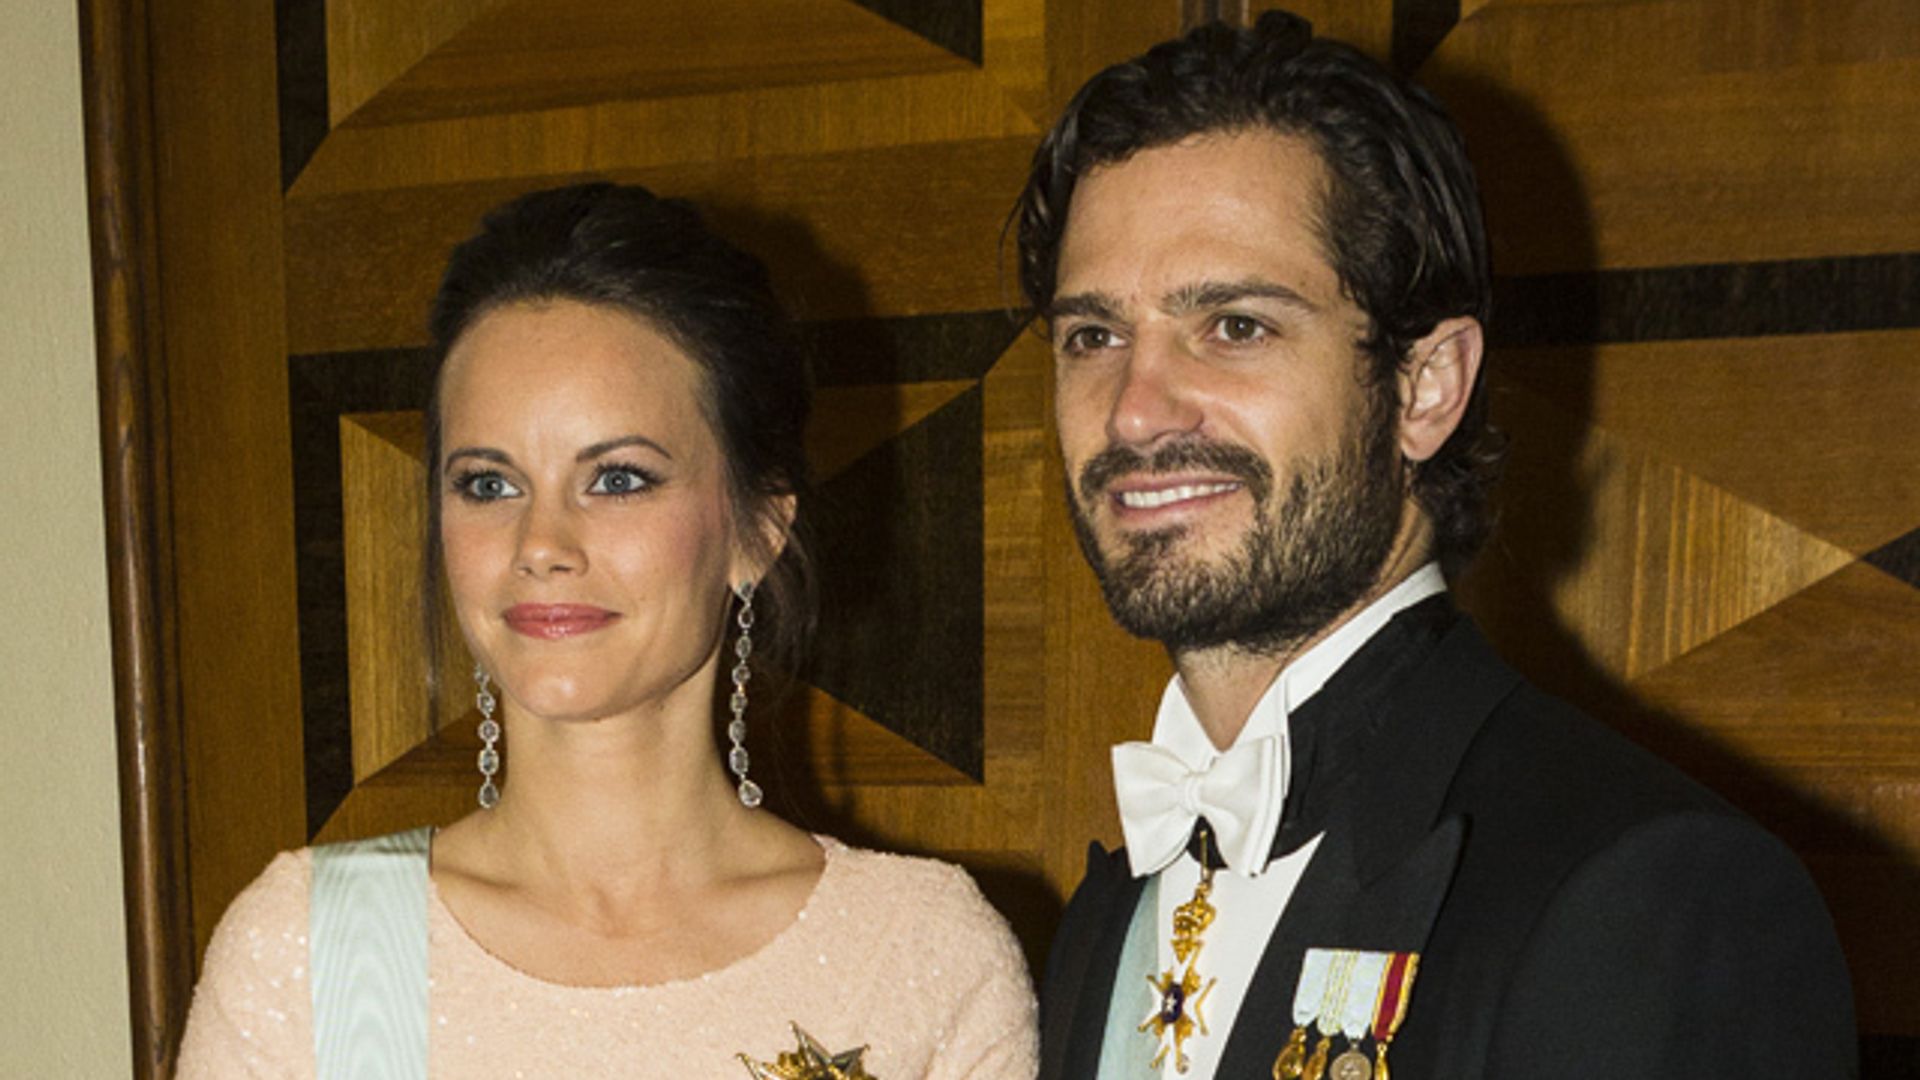 Princess Sofia of Sweden shows off growing baby bump in ASOS gown